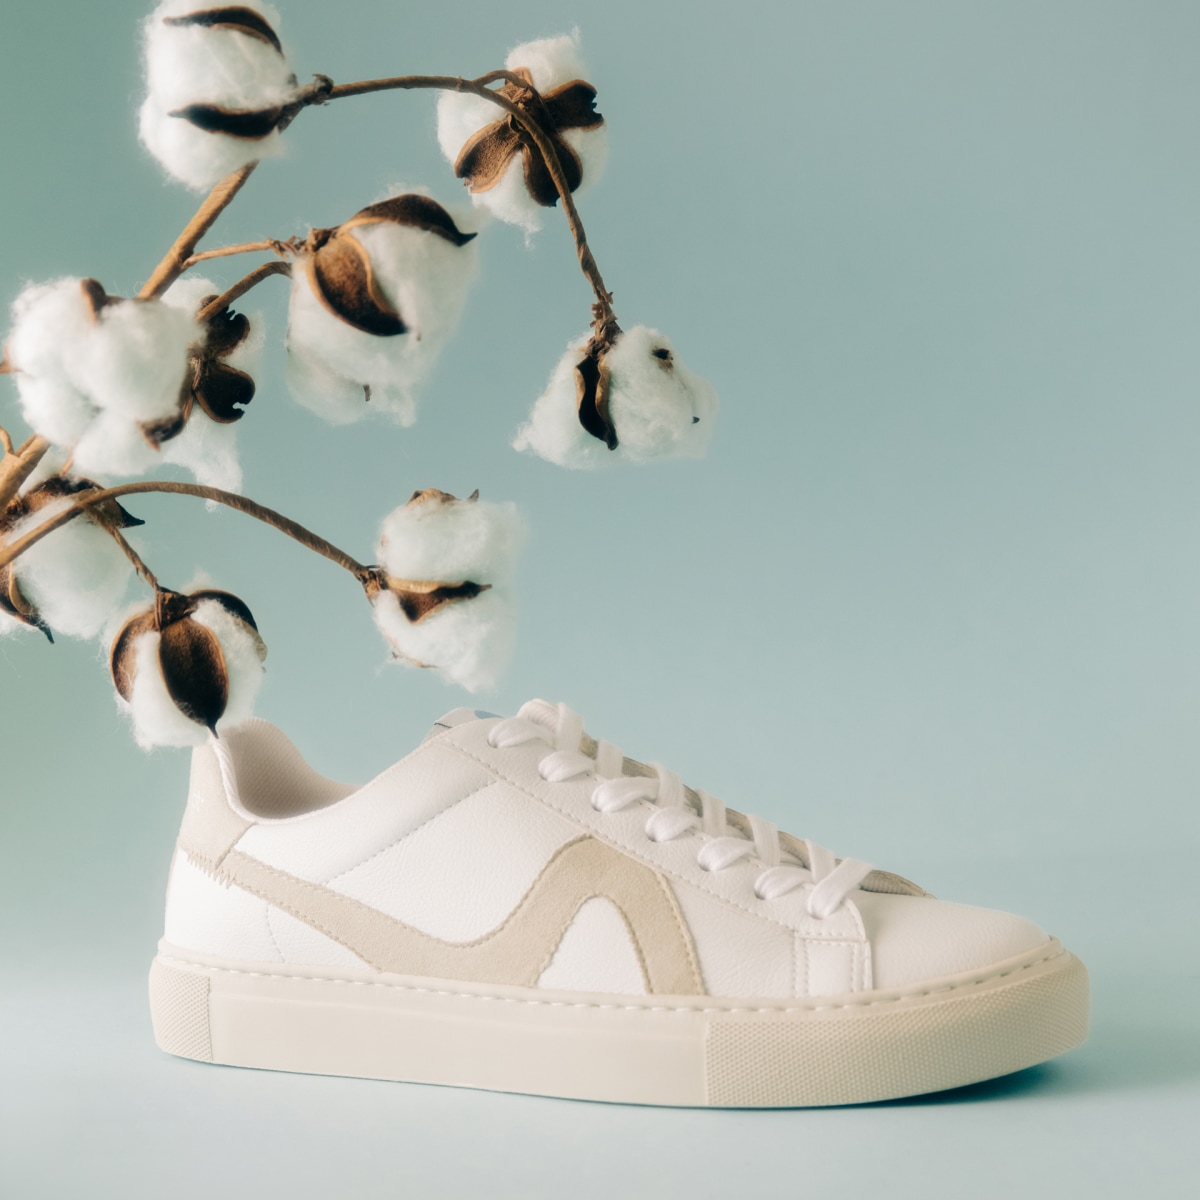 Louis Vuitton Launches Sustainable Vegan Sneakers Made From Corn